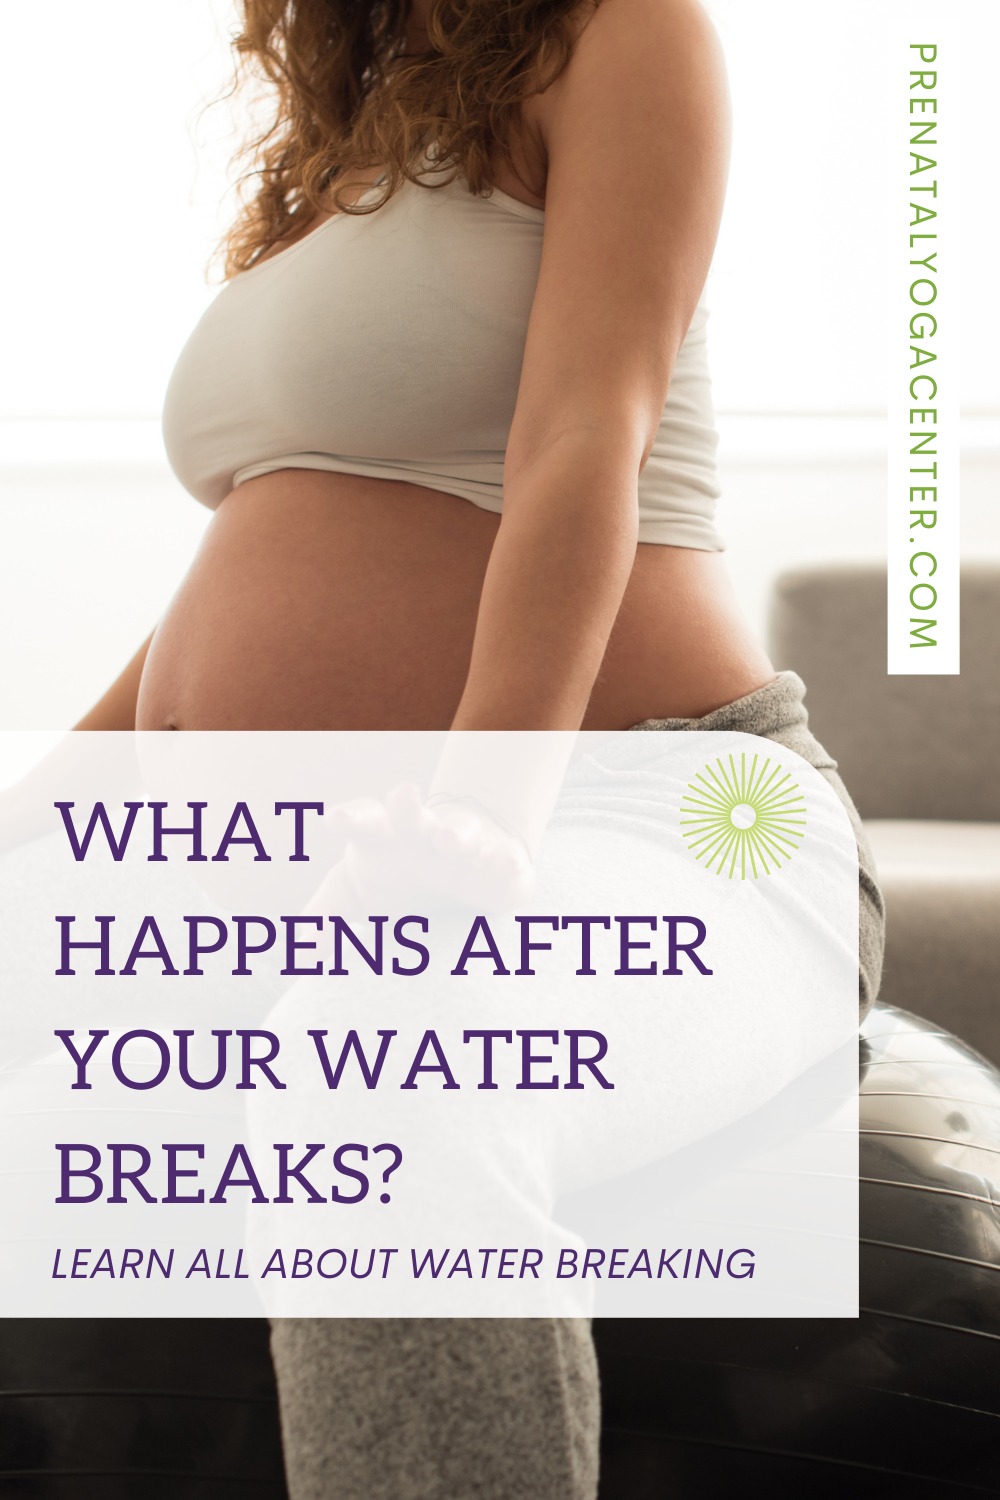 Water breaking: what REALLY happens after it breaks? Read more